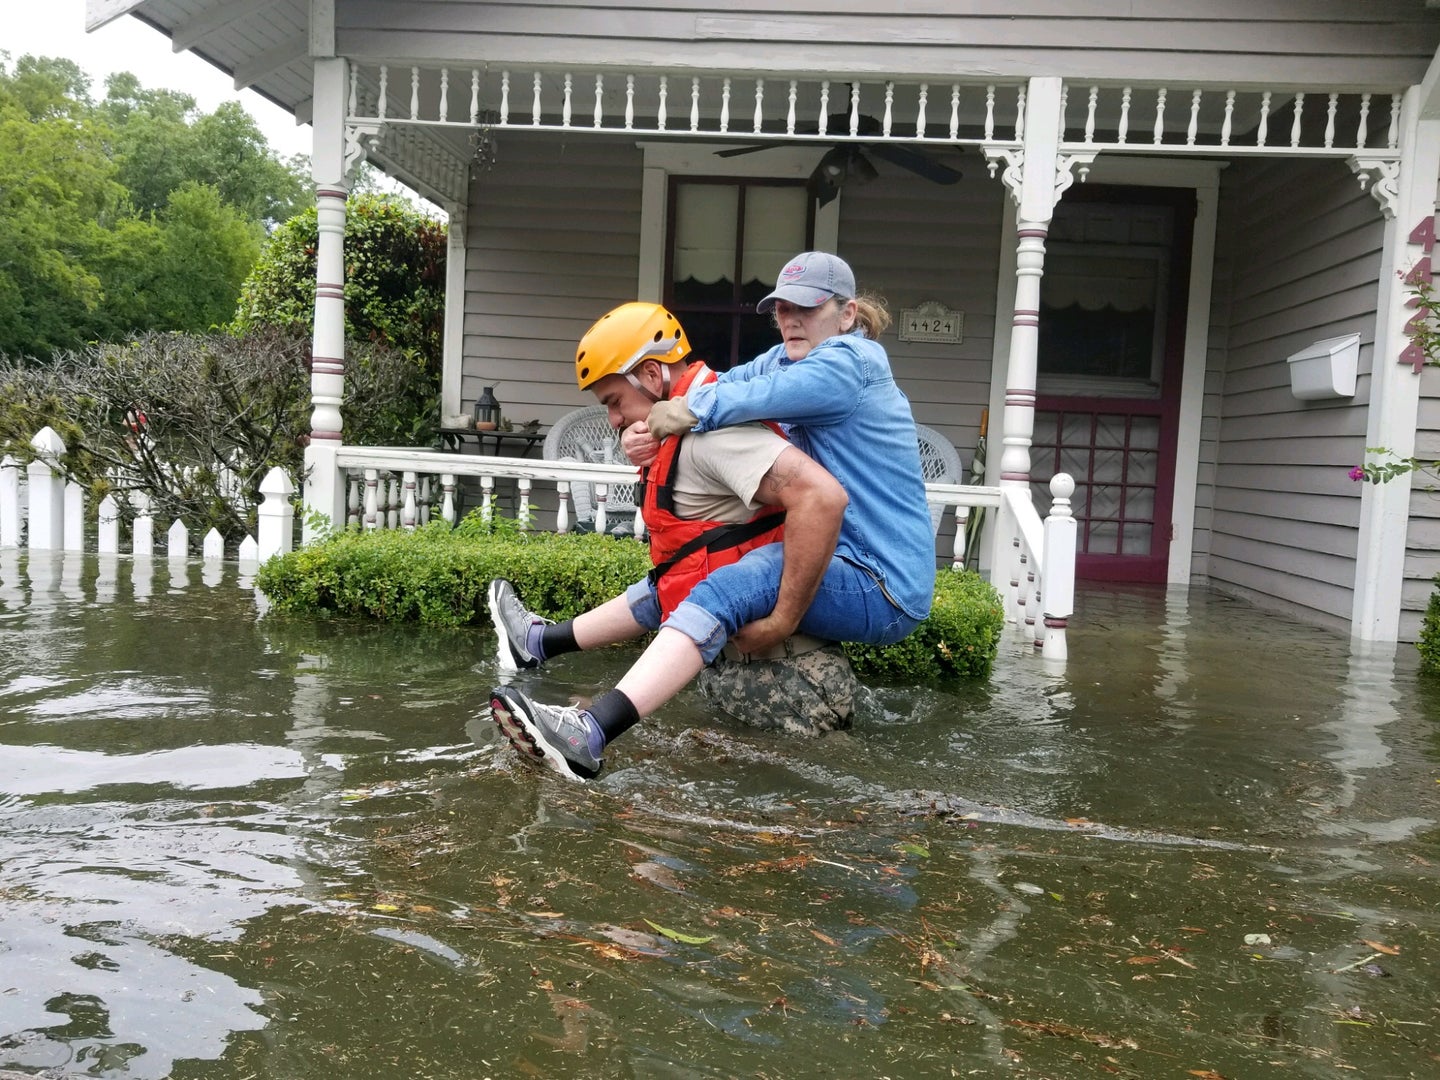 a national guard soldier carries a woman on his back through flooded streets during a hurricane